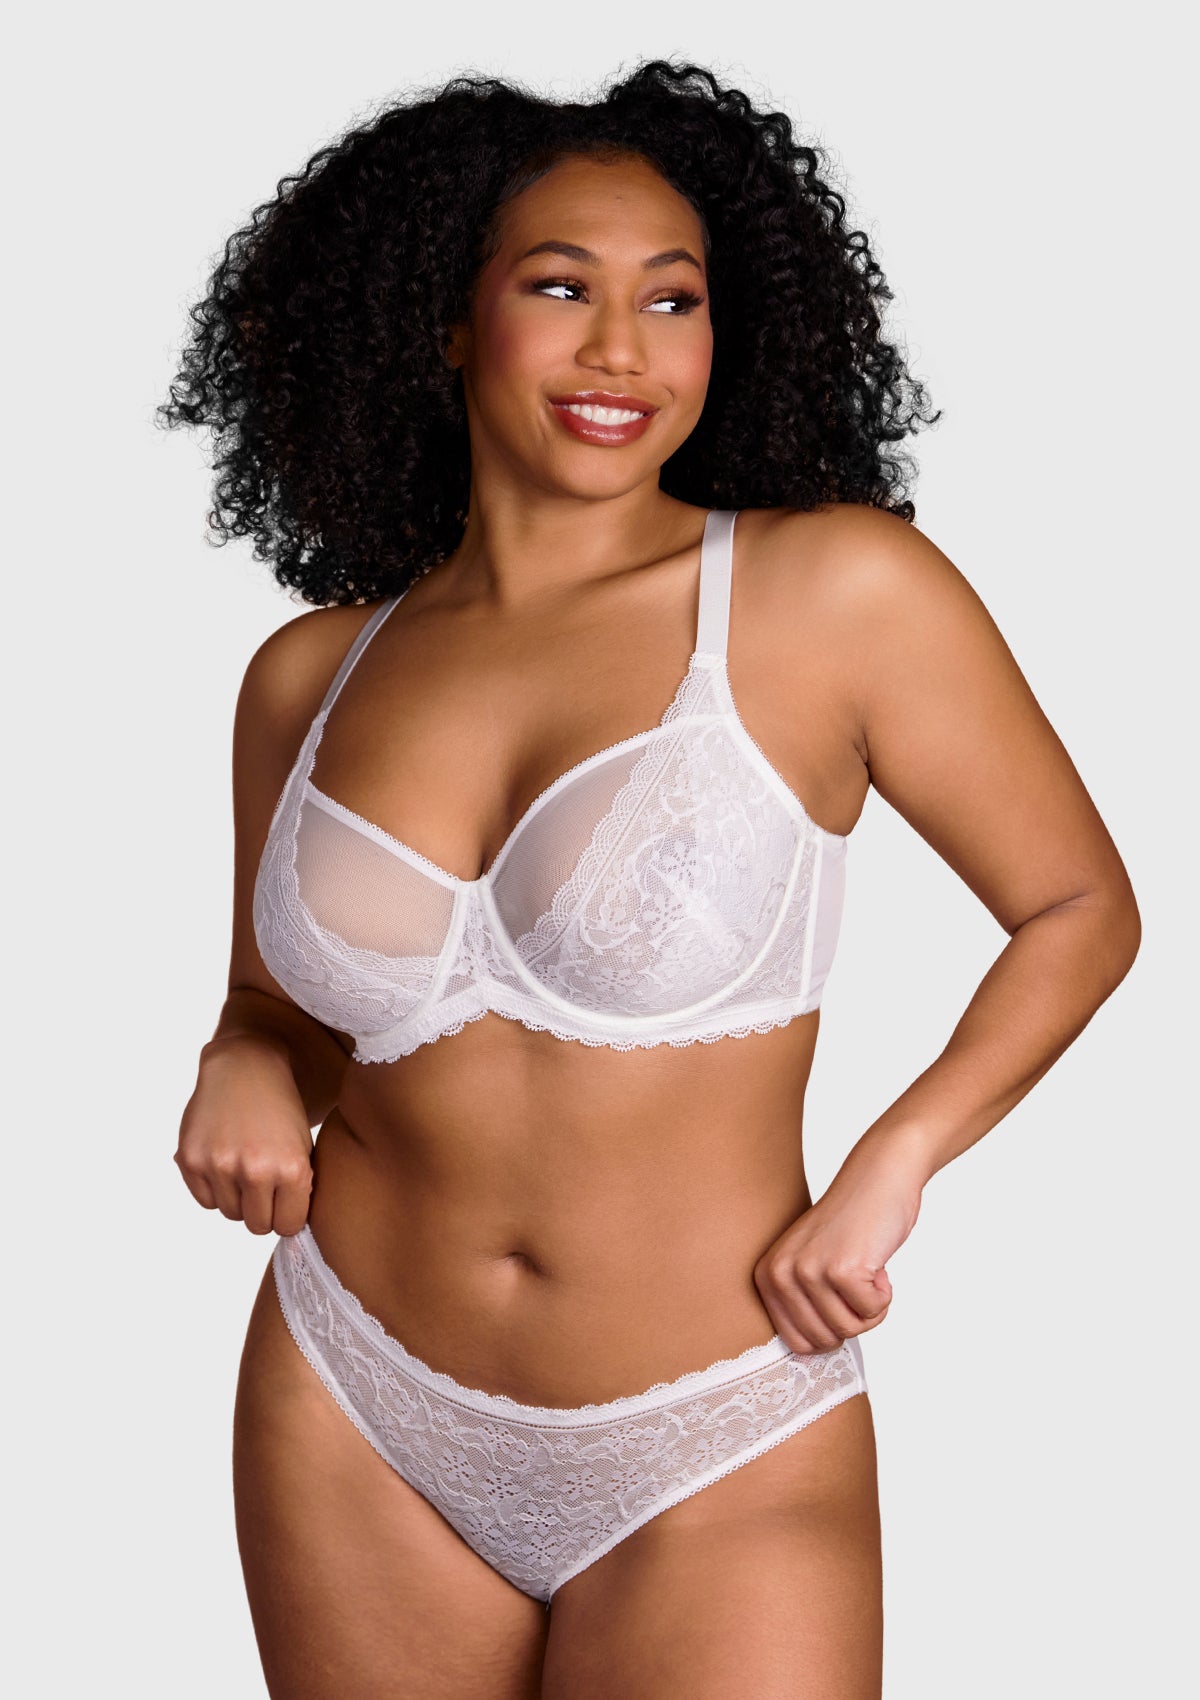 HSIA Anemone Big Bra: Best Bra For Lift And Support, Floral Bra - Light Blue / 38 / C